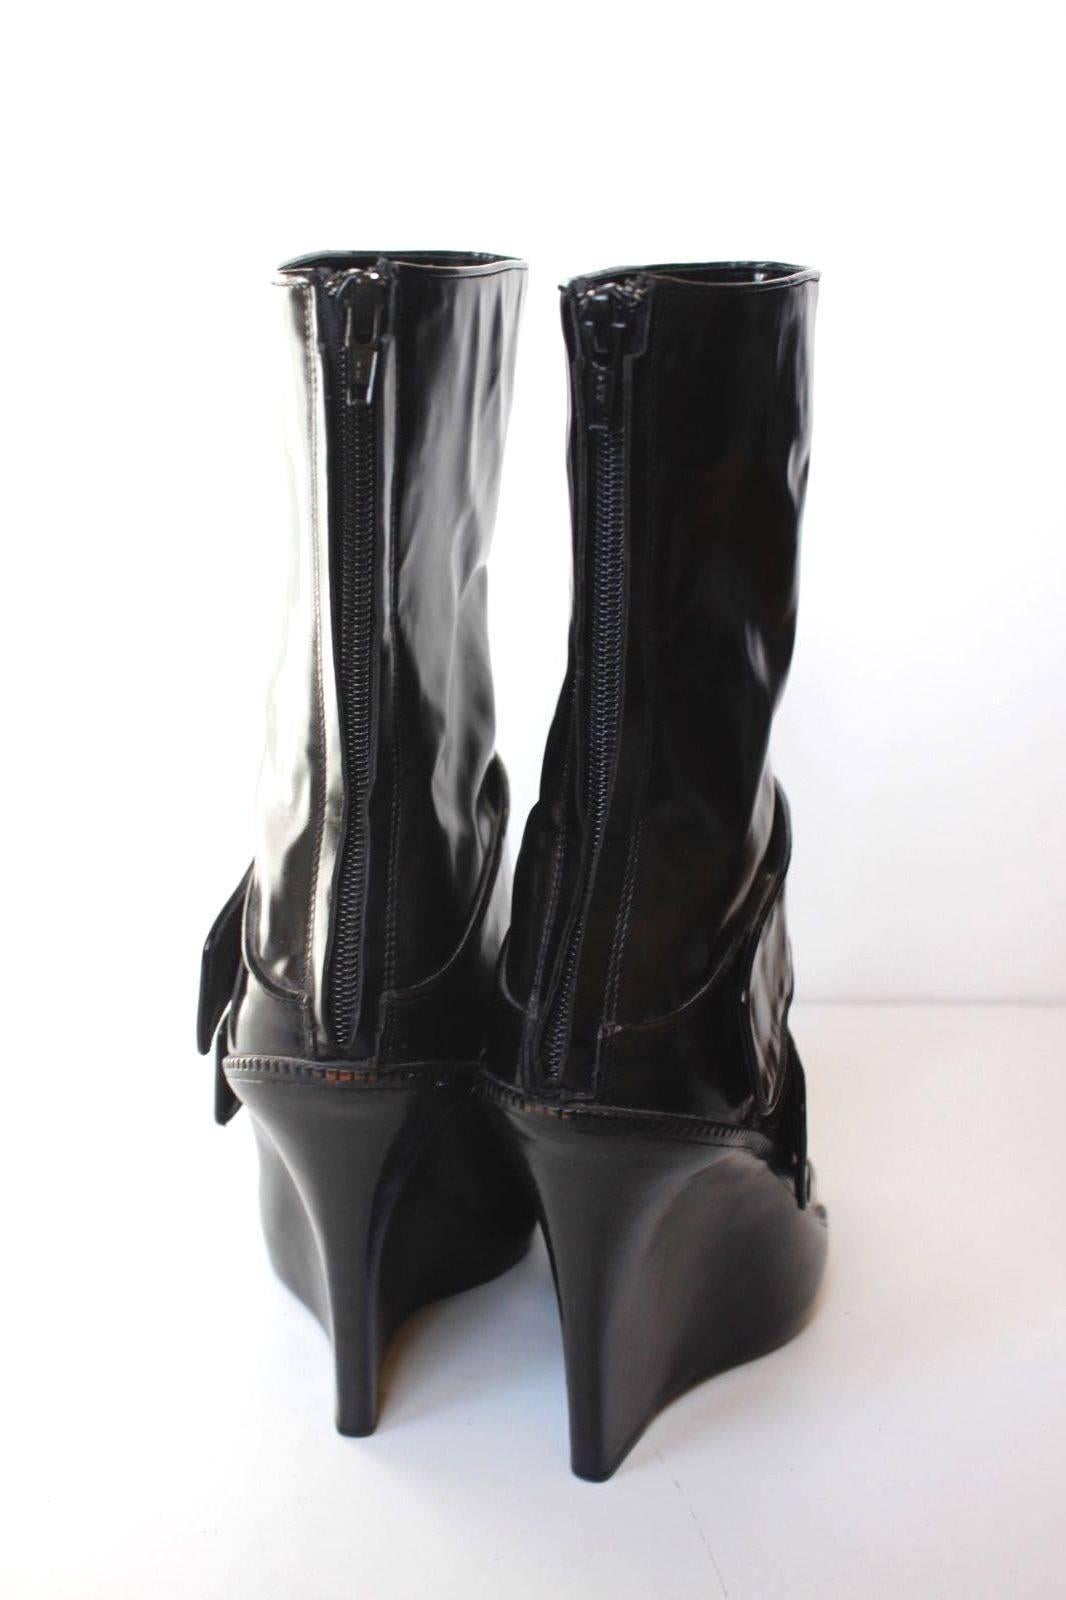 Givenchy Black Patent Leather Wedge Midi Boots 40.5 uk 7.5  For Sale 1